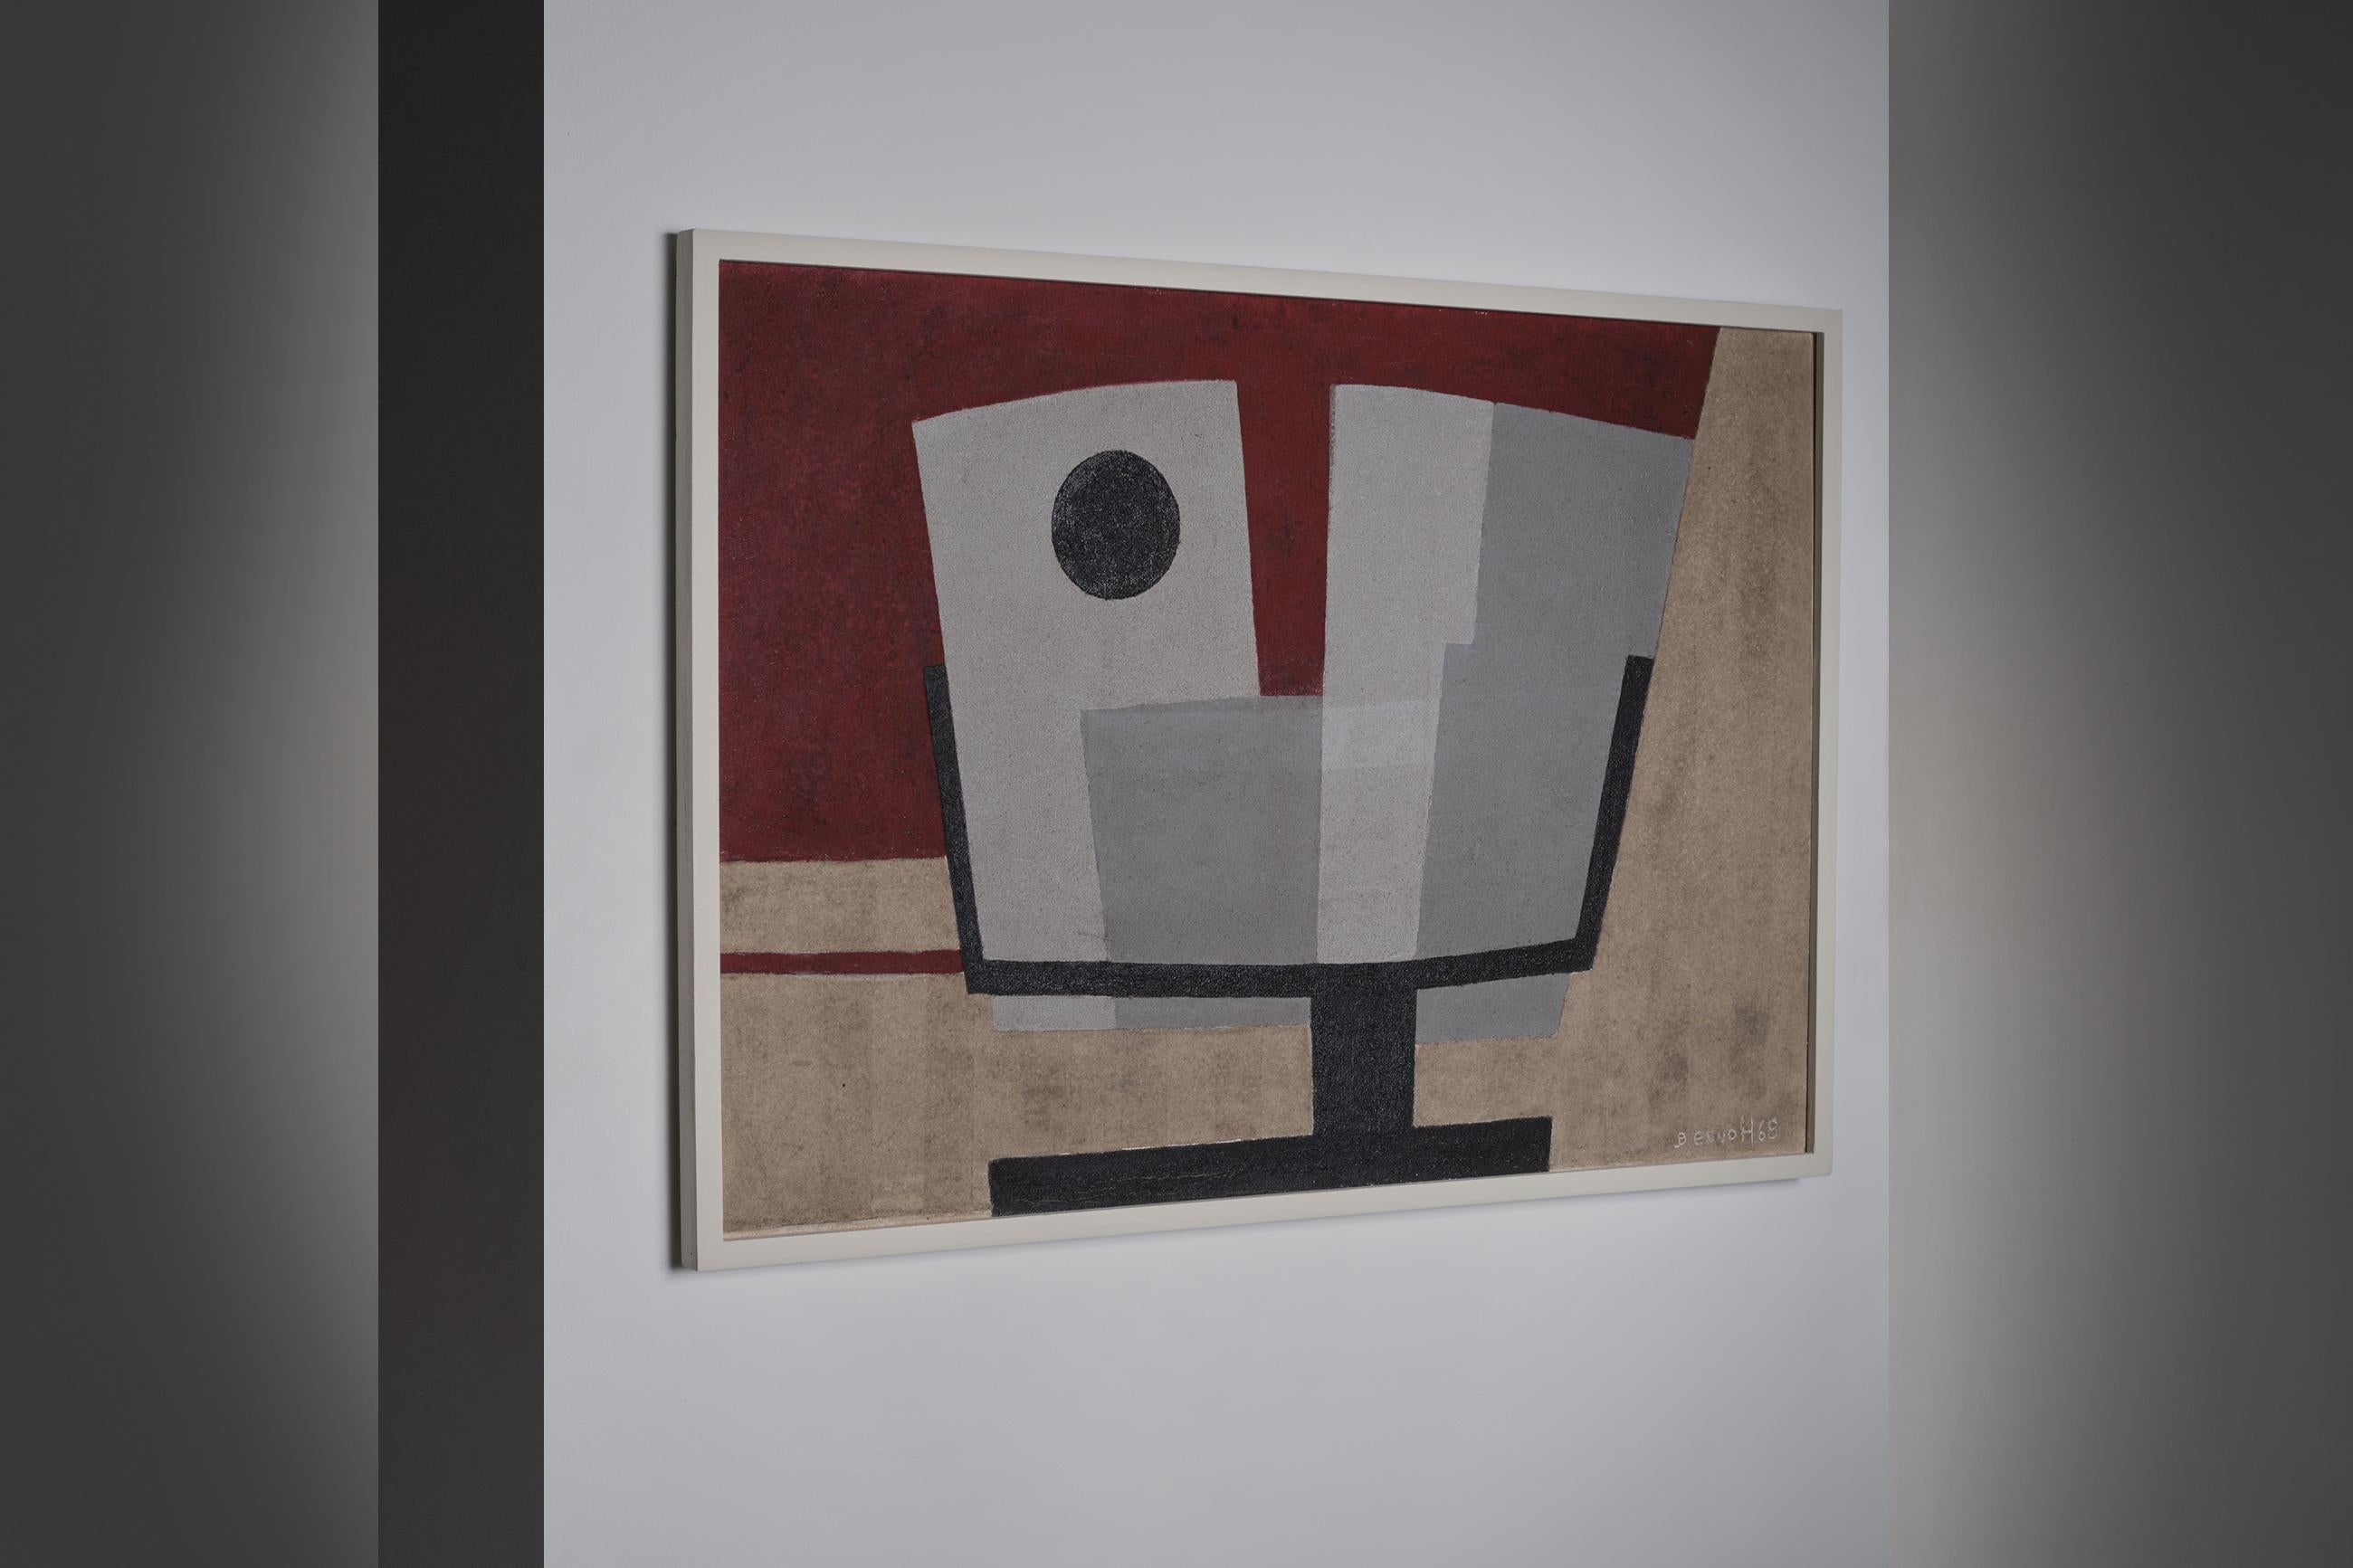 Abstract constructivist painting by B.J. Helders, the Netherlands, 1968. The painting is made in several thick layers of structured paint in a fabulous color scheme; ox blood, several shades of grey, black and sand. The sand colored part shows a